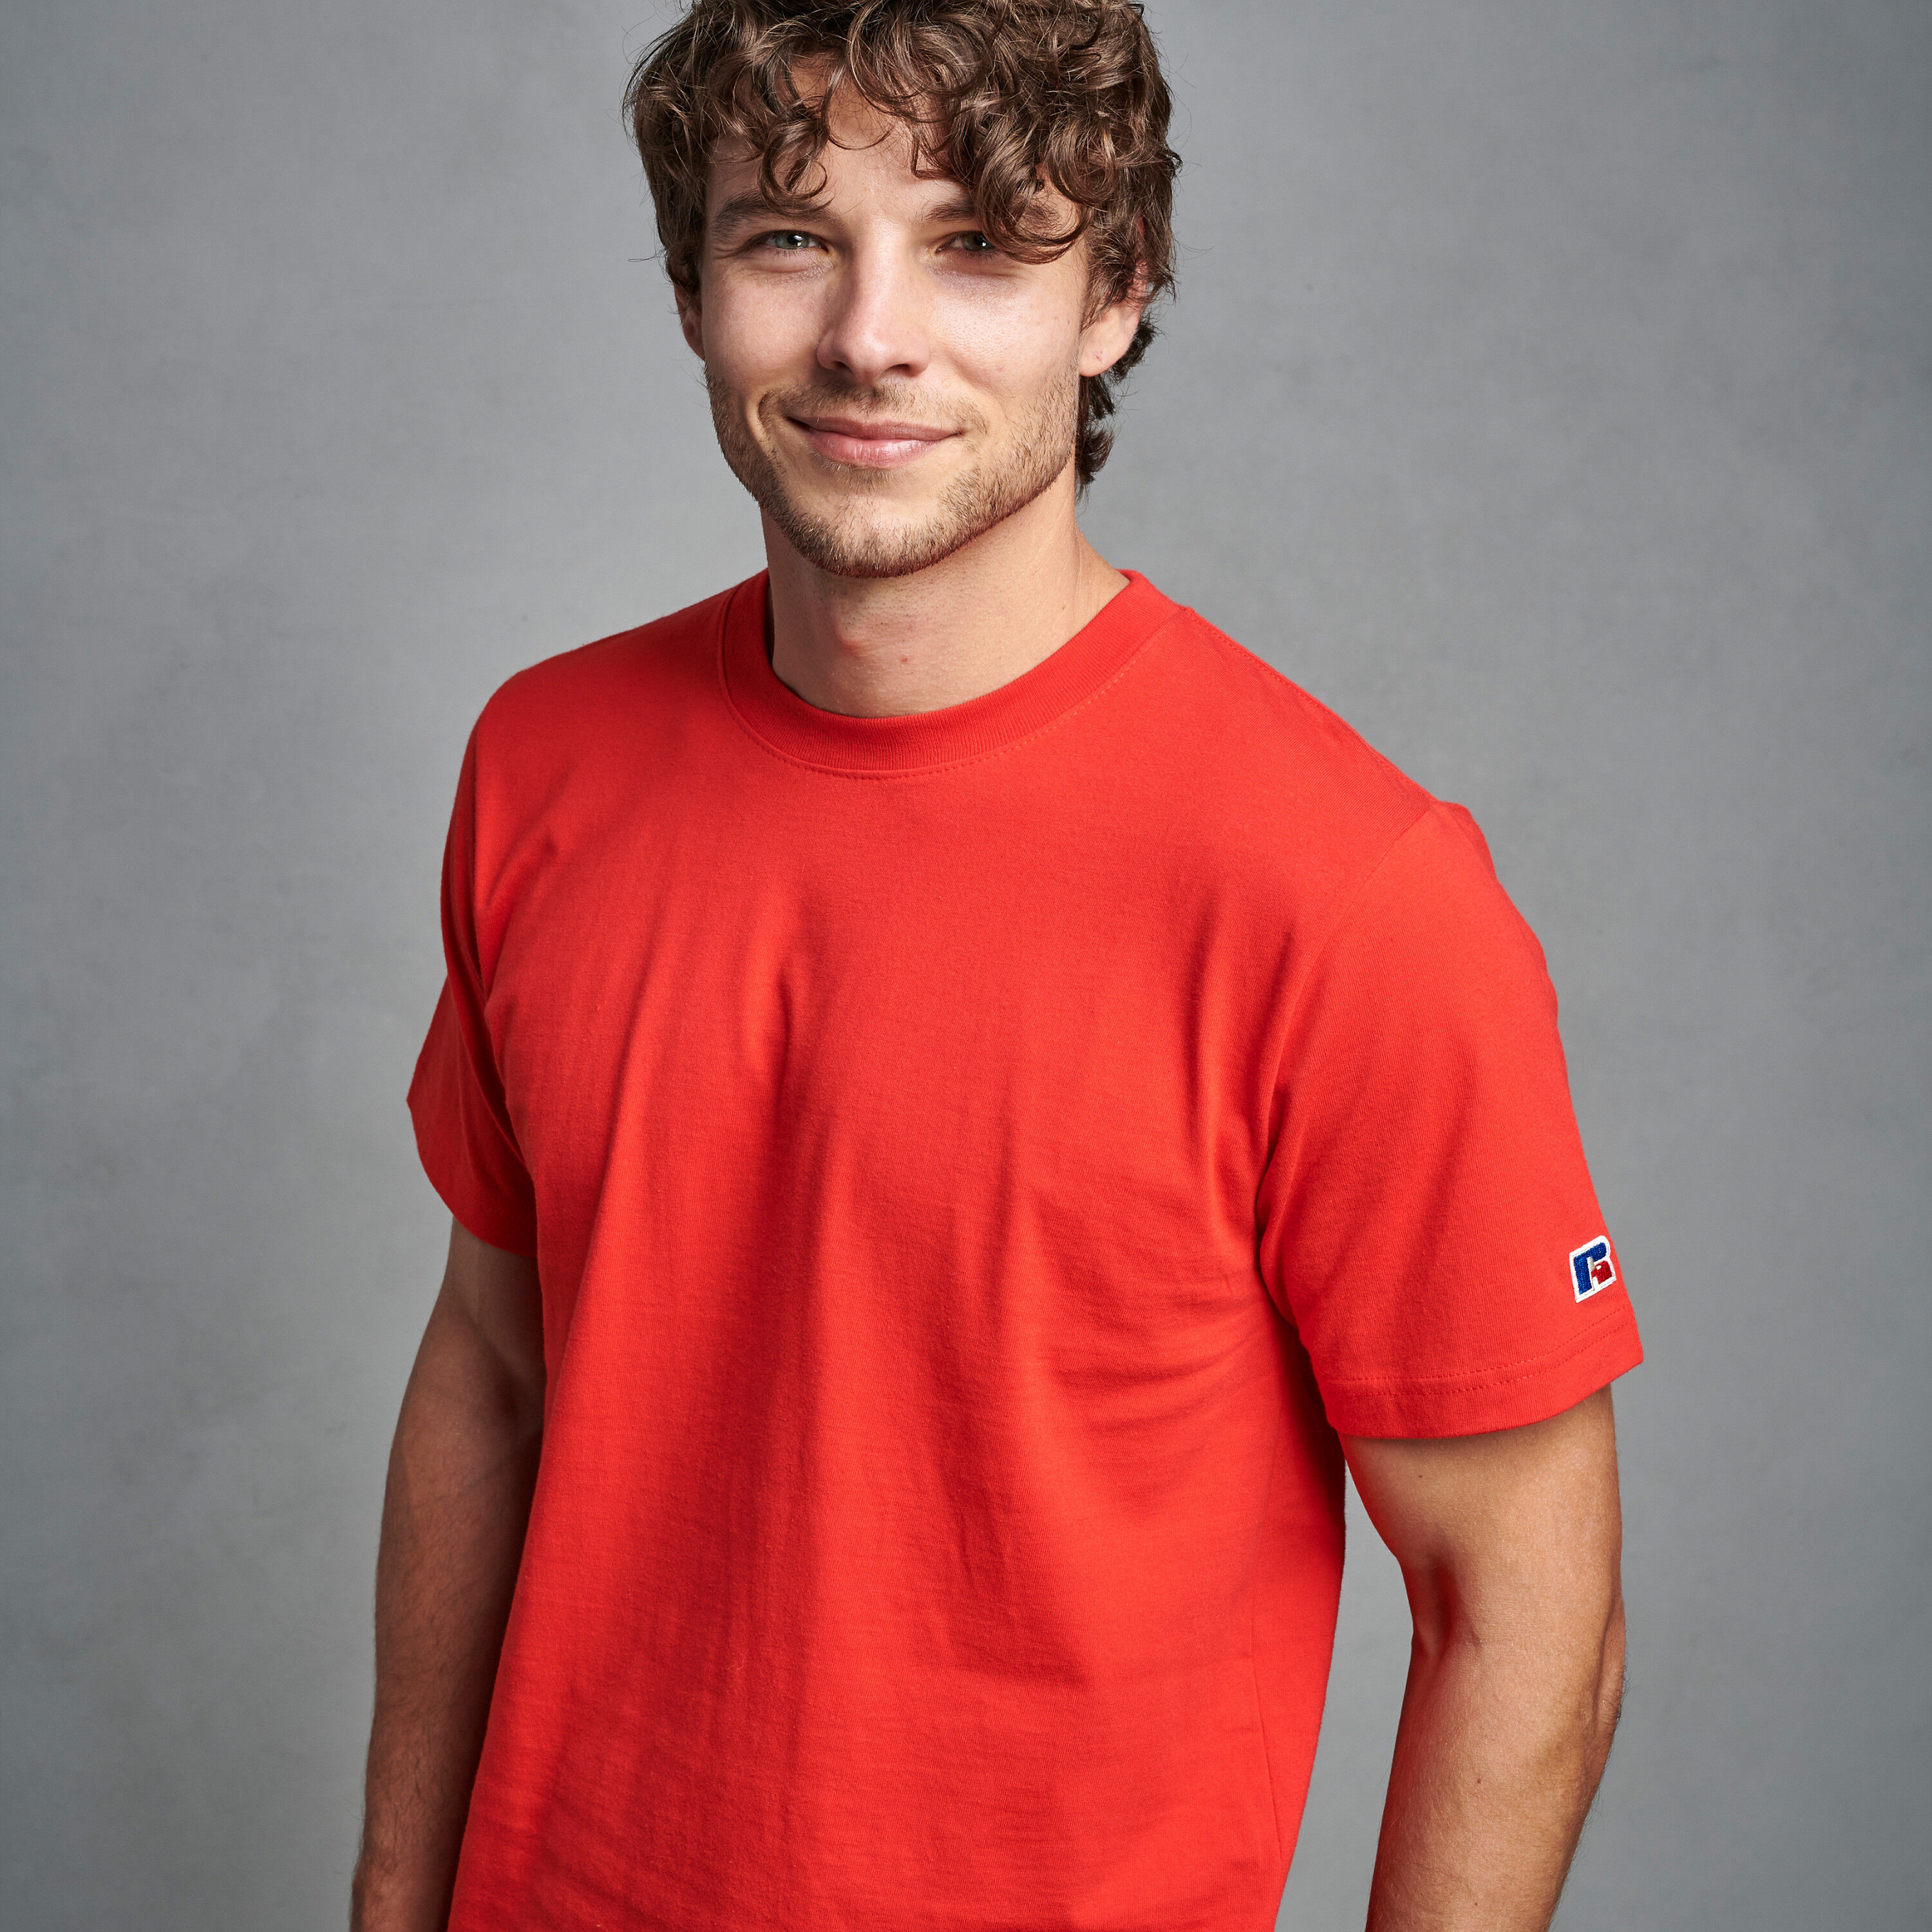 man in red t shirt